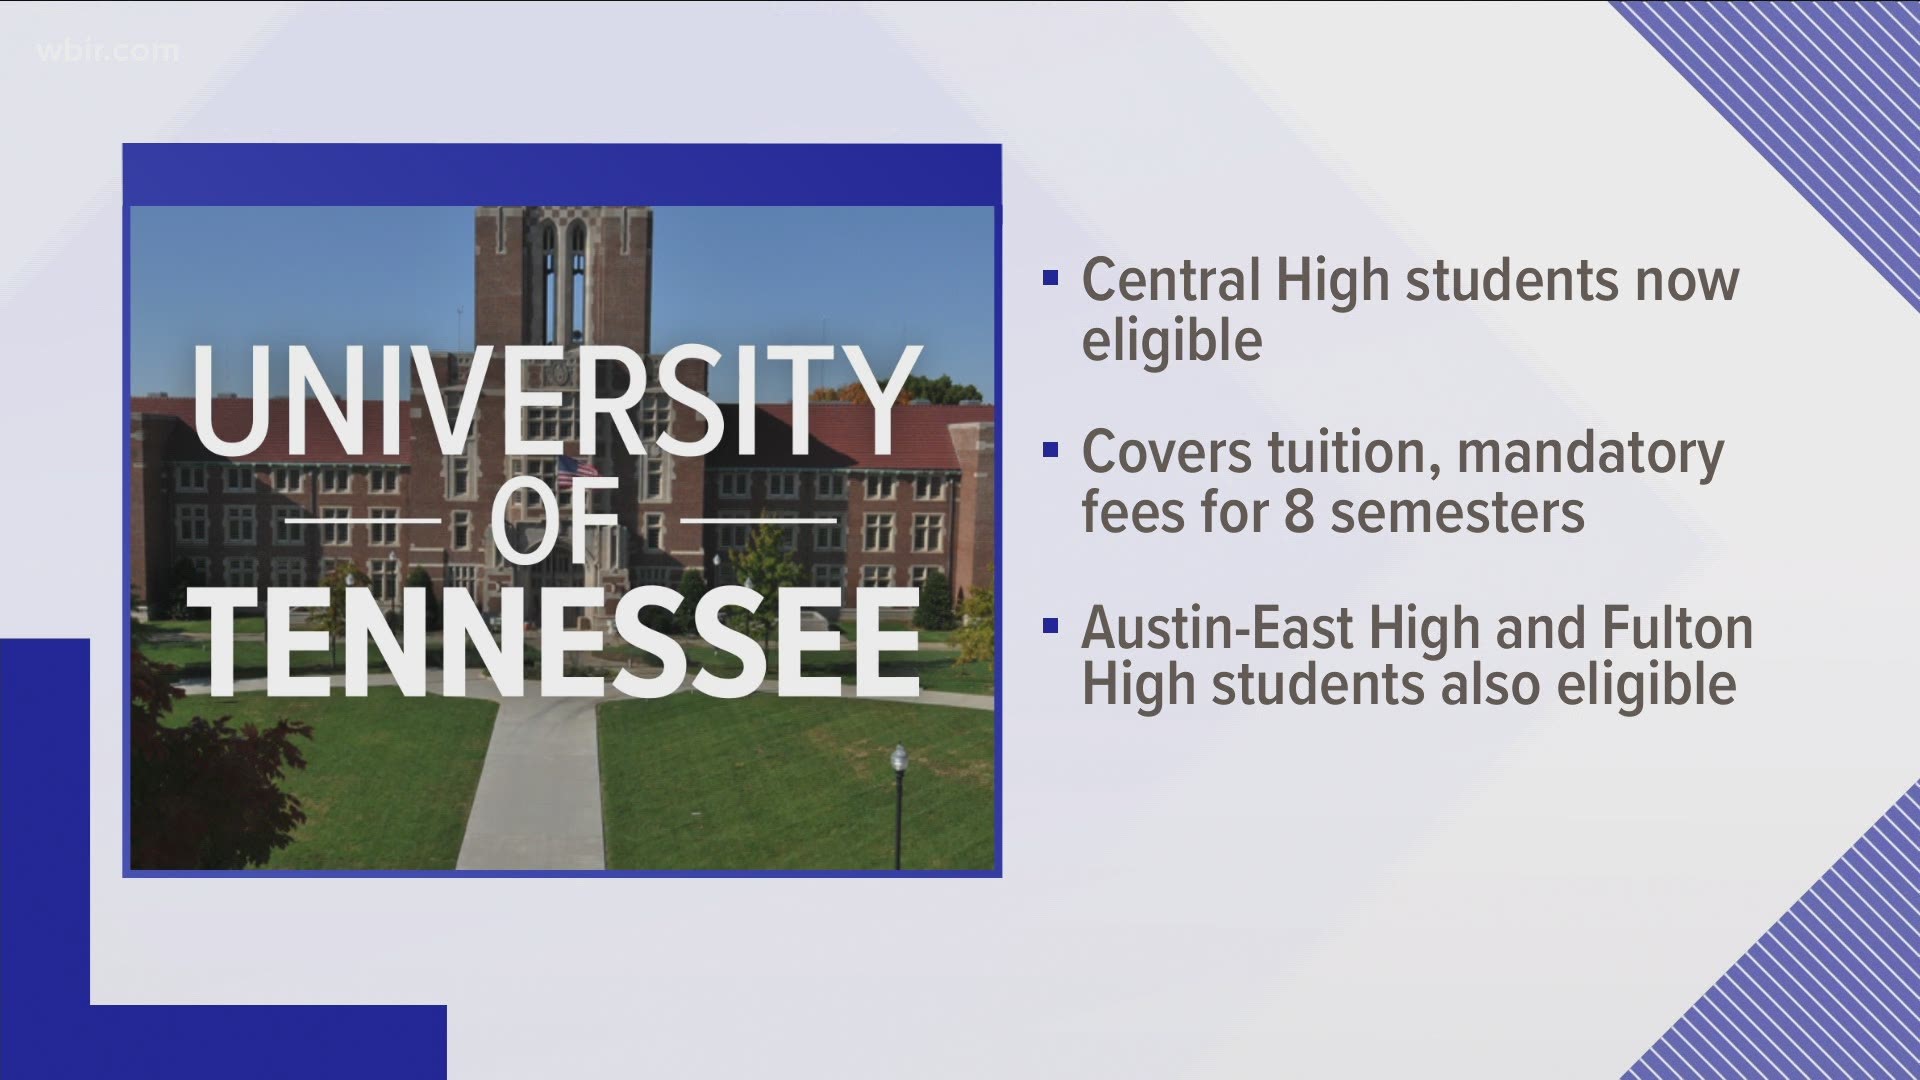 Central High School students in Knoxville are now eligible for a big scholarship at UT.